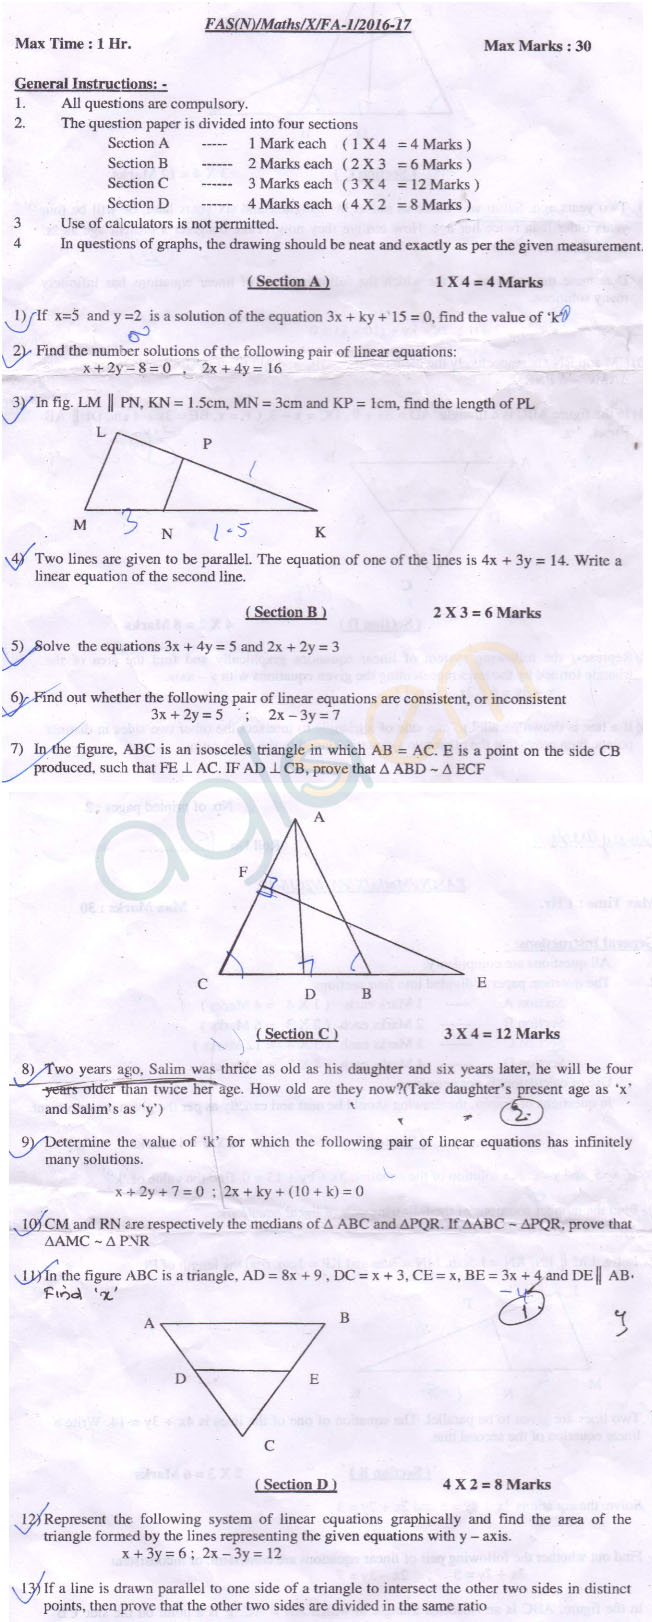 CBSE Class 10 Formative Assessment I Question Paper